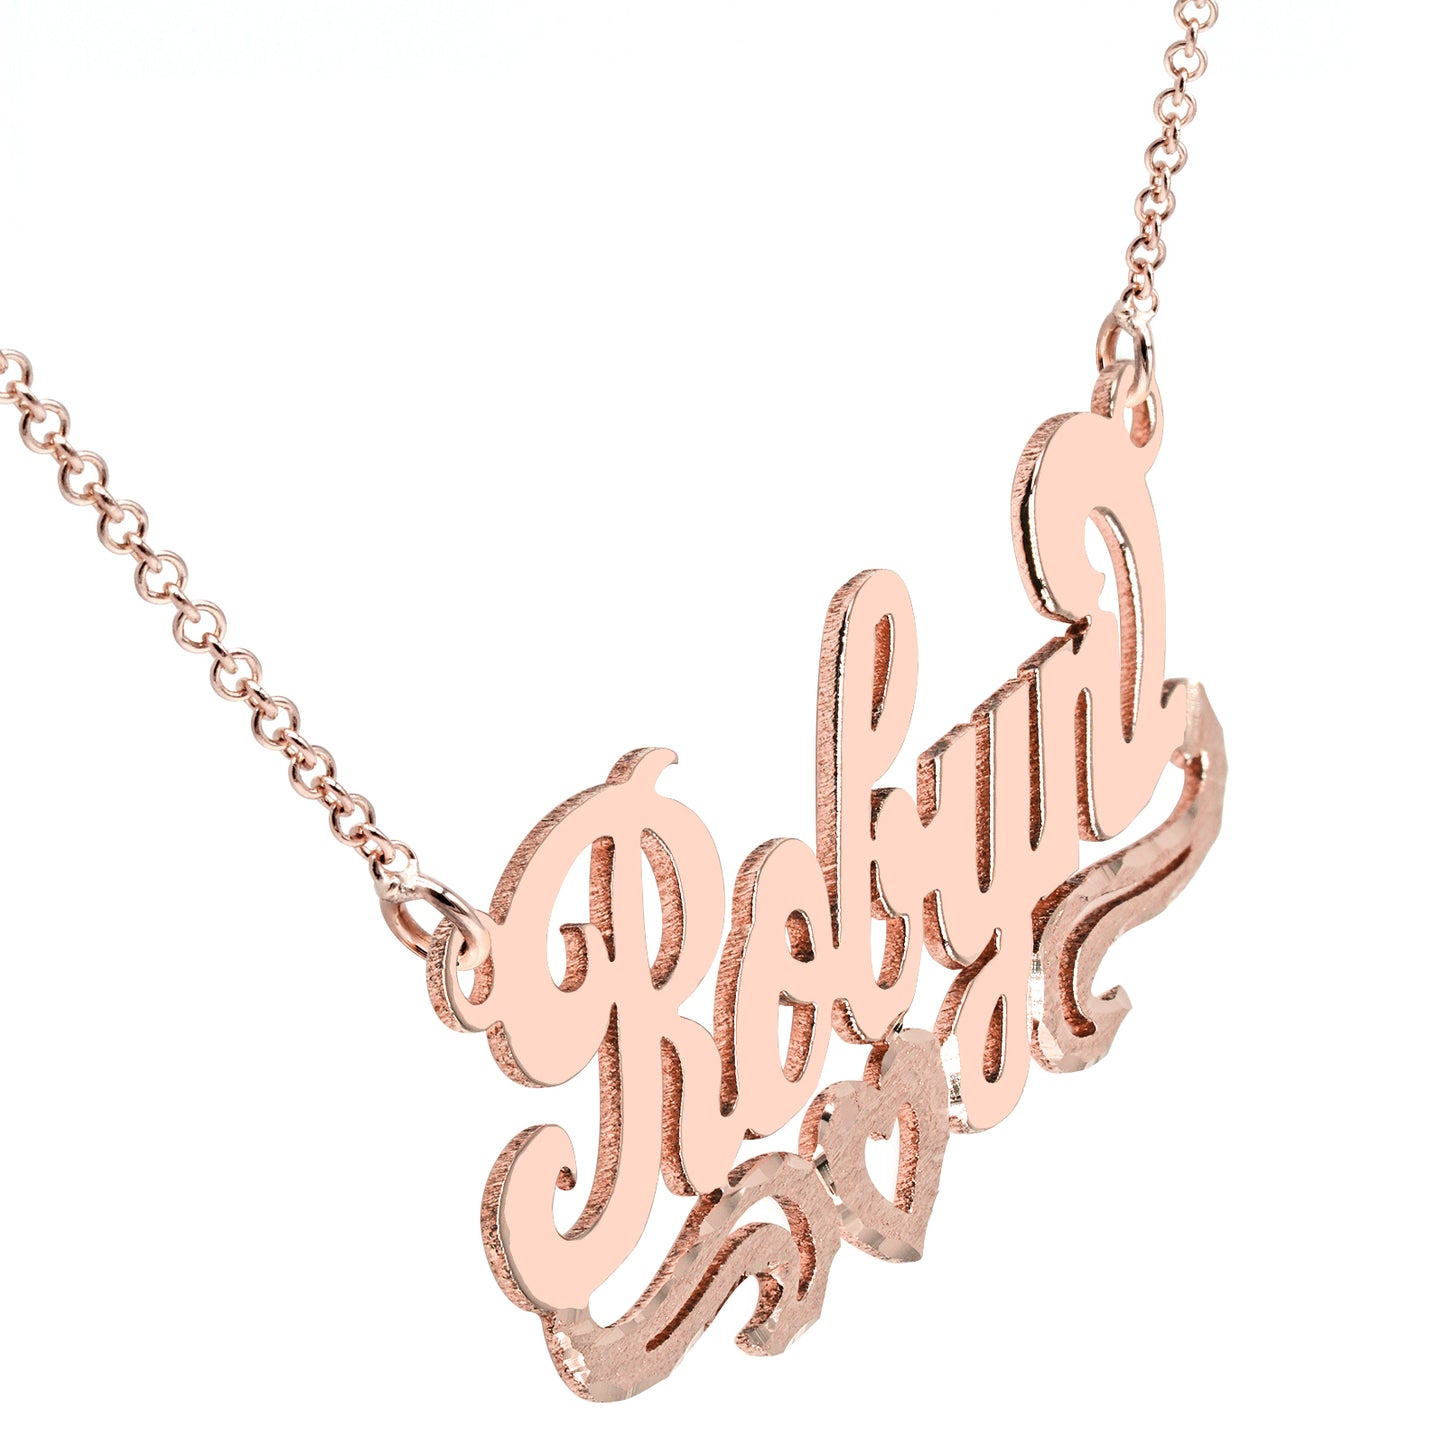 Personalized 14kt. Gold Nameplate Necklace with Heart Flourish | Florentine Finish